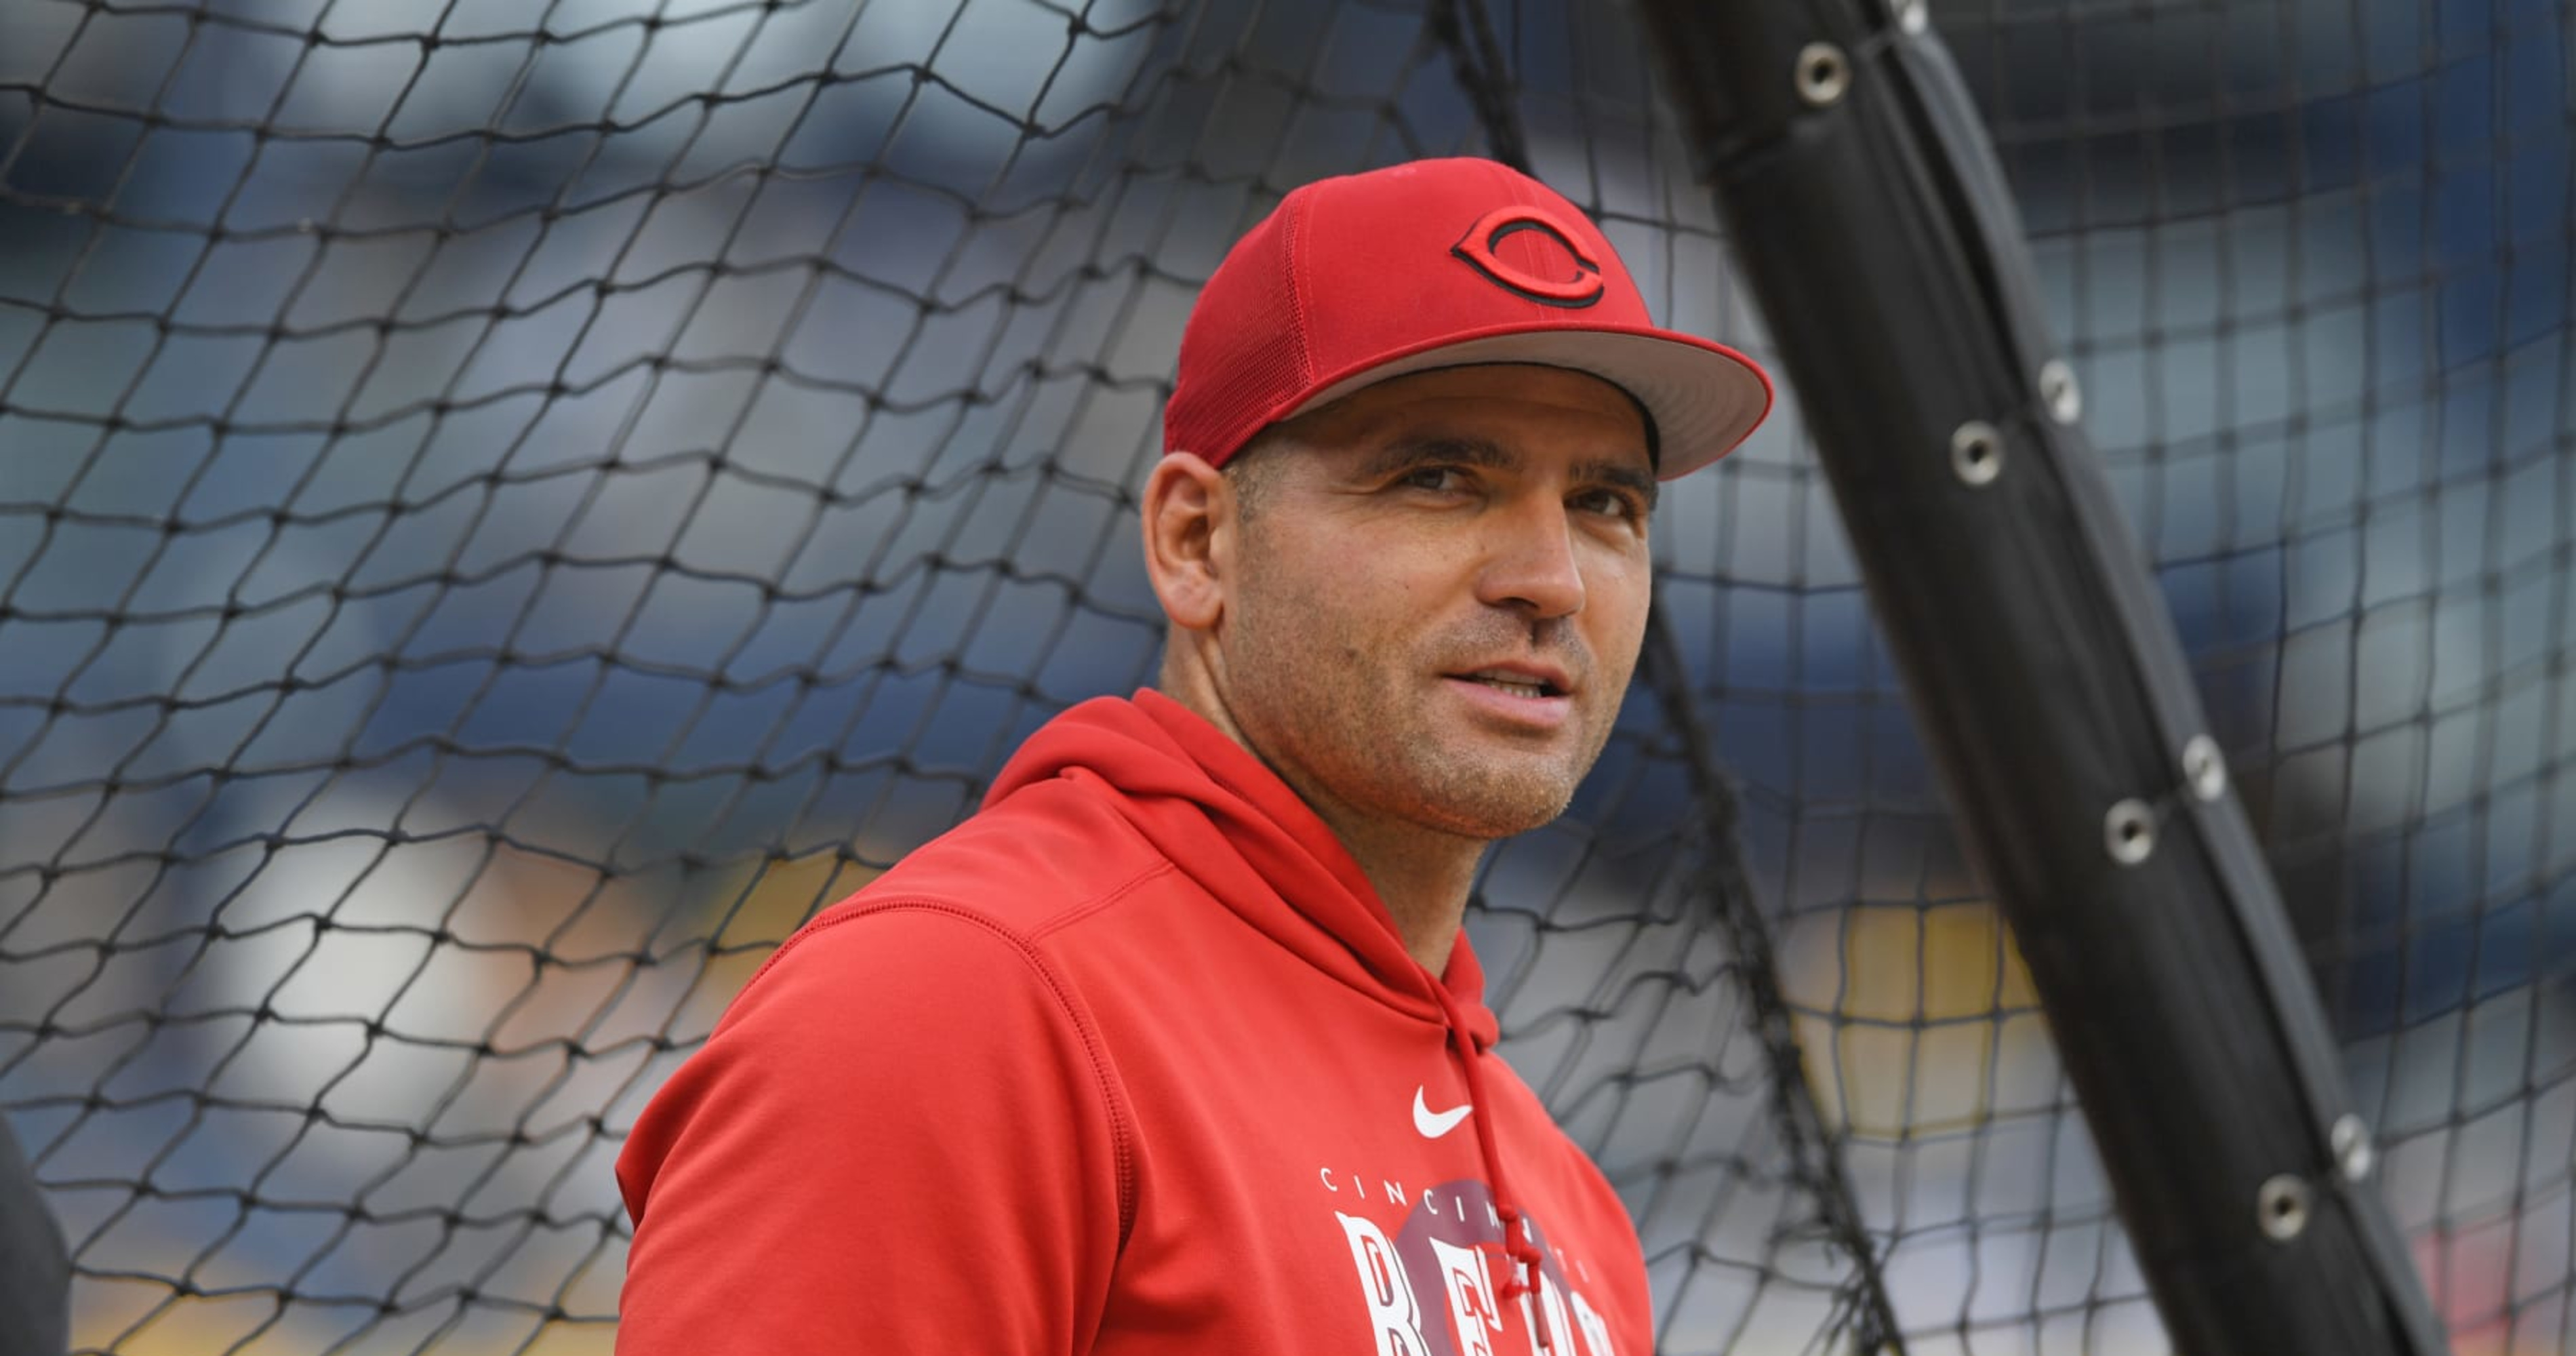 Picture of Joey Votto at today's workout. : r/baseball